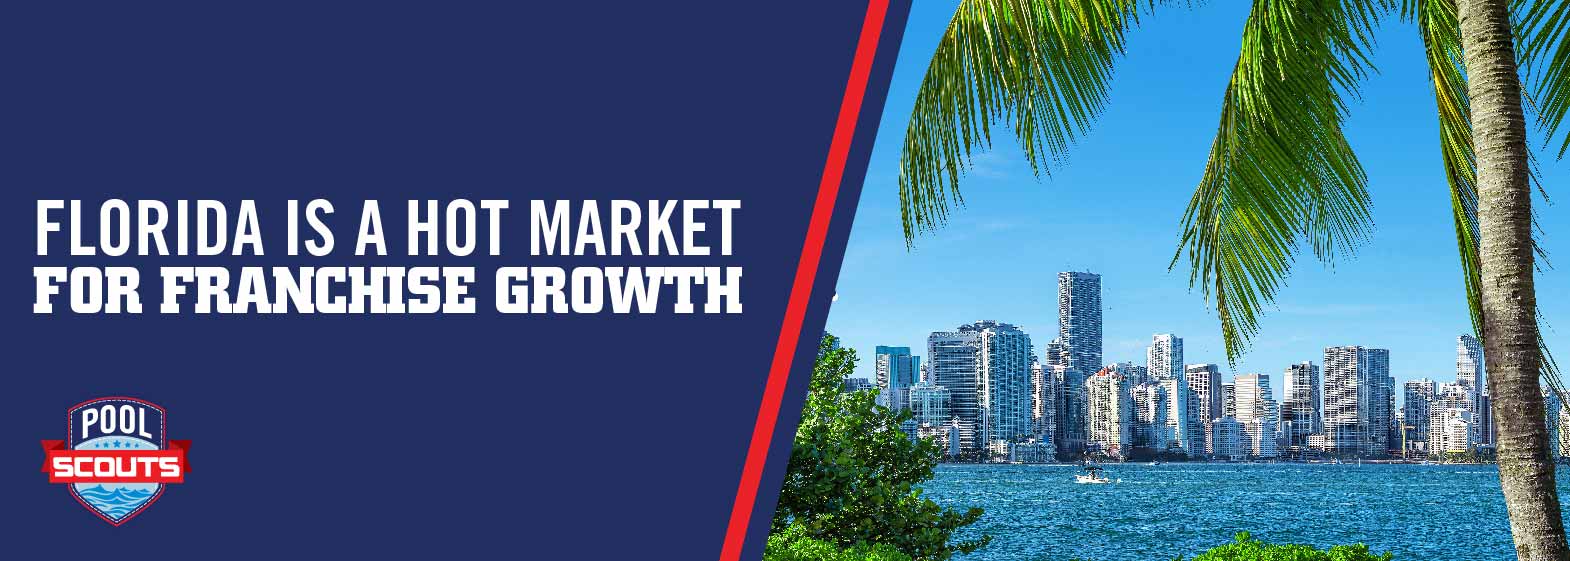 Picture of Florida city in background with a palm tree highlighting franchise growth